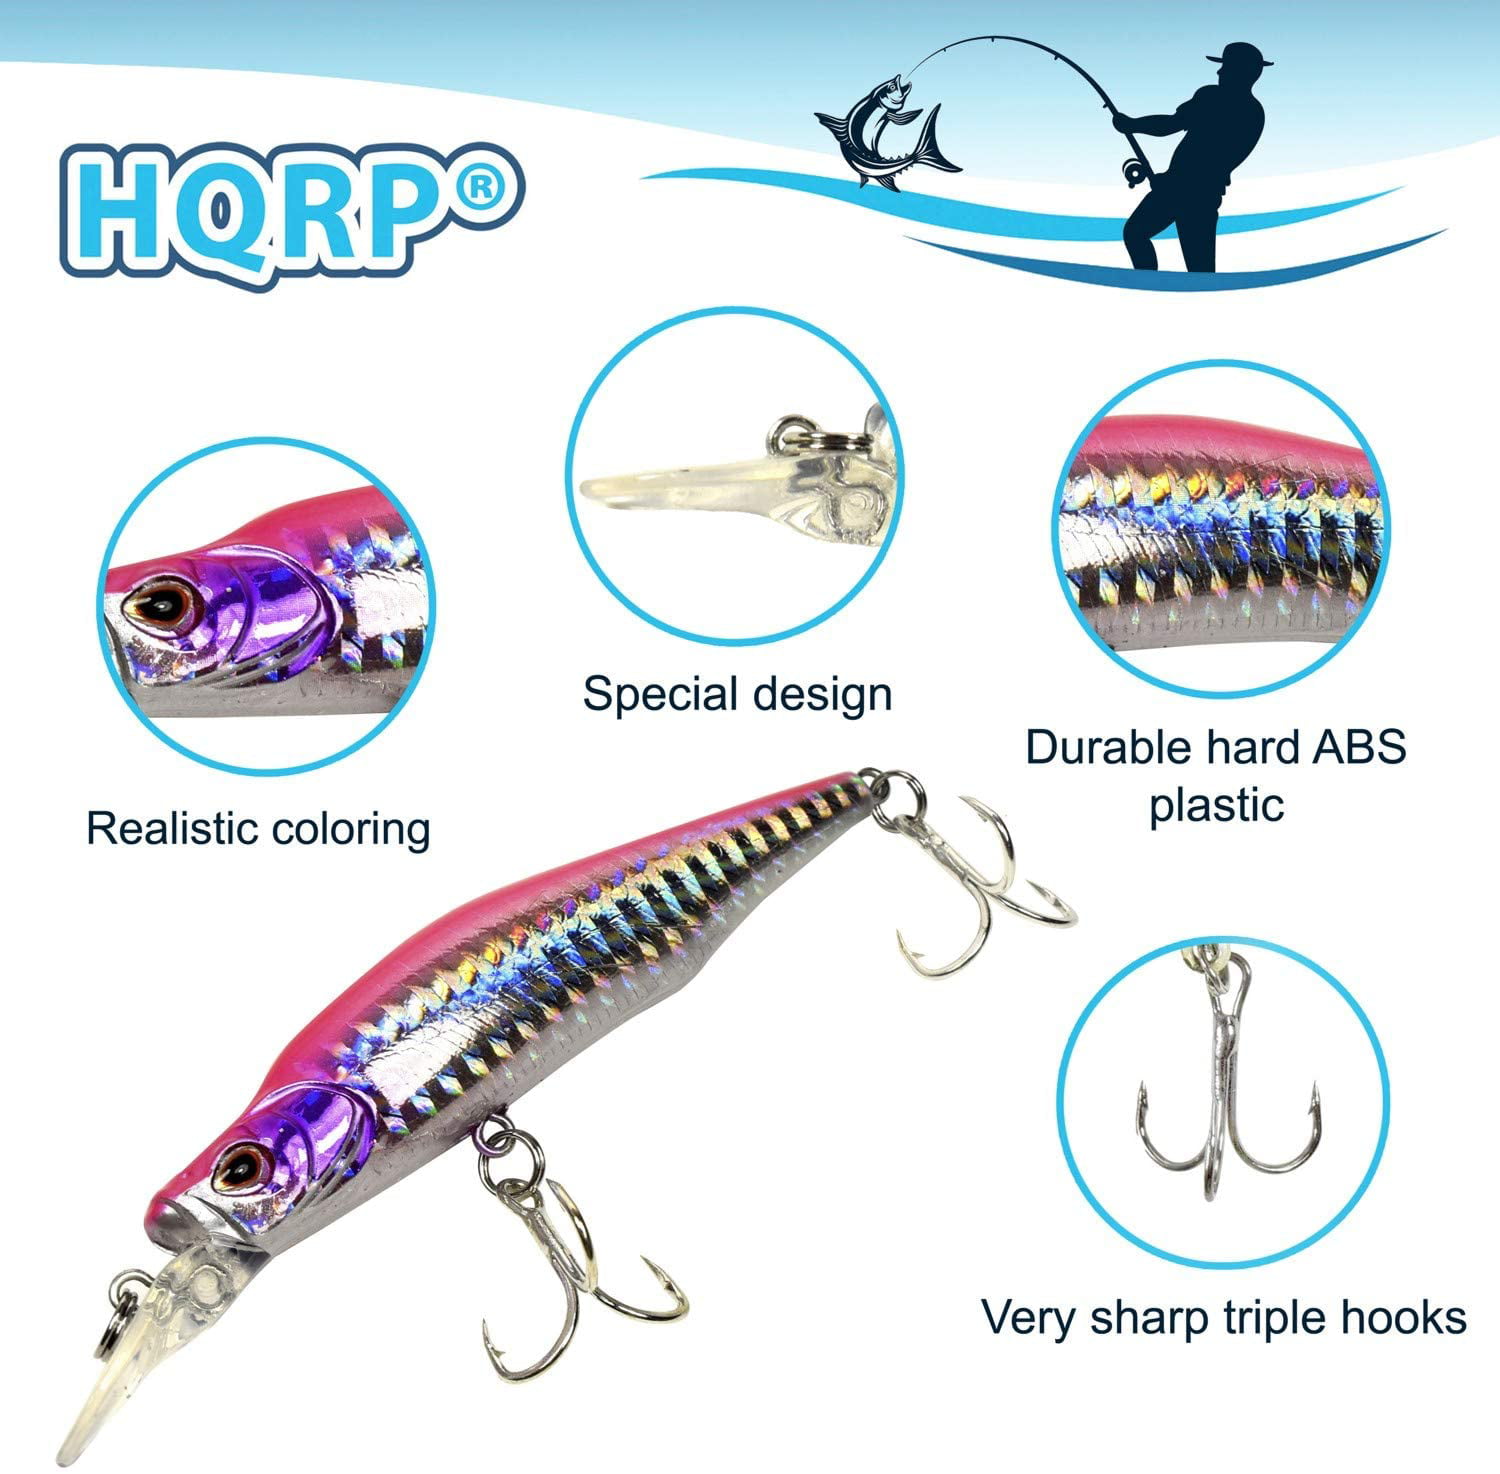  DONQL Crankbaits Fishing Lure Set Minnow Baits Kit Wobbler  Topwater Lures with Hooks Hard Popper Lures for Saltwater Freshwater Trout  Bass Perch Salmon Fishing (Type 1-4.5 cm / 4g) 